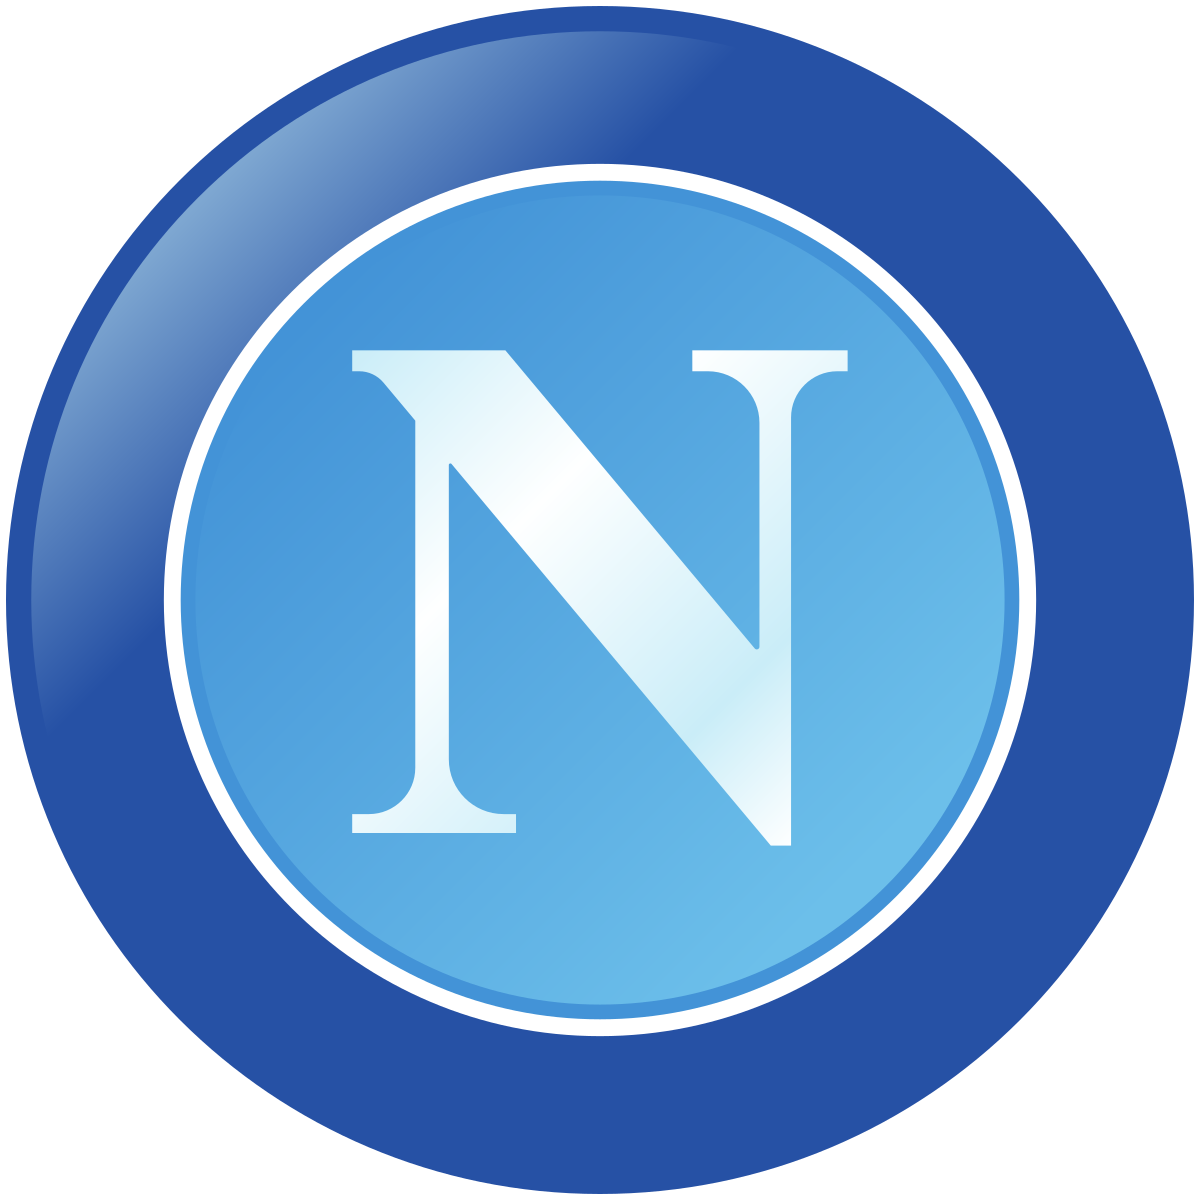 Are we allowed to start believing Napoli’s chances of winning the Serie A yet?